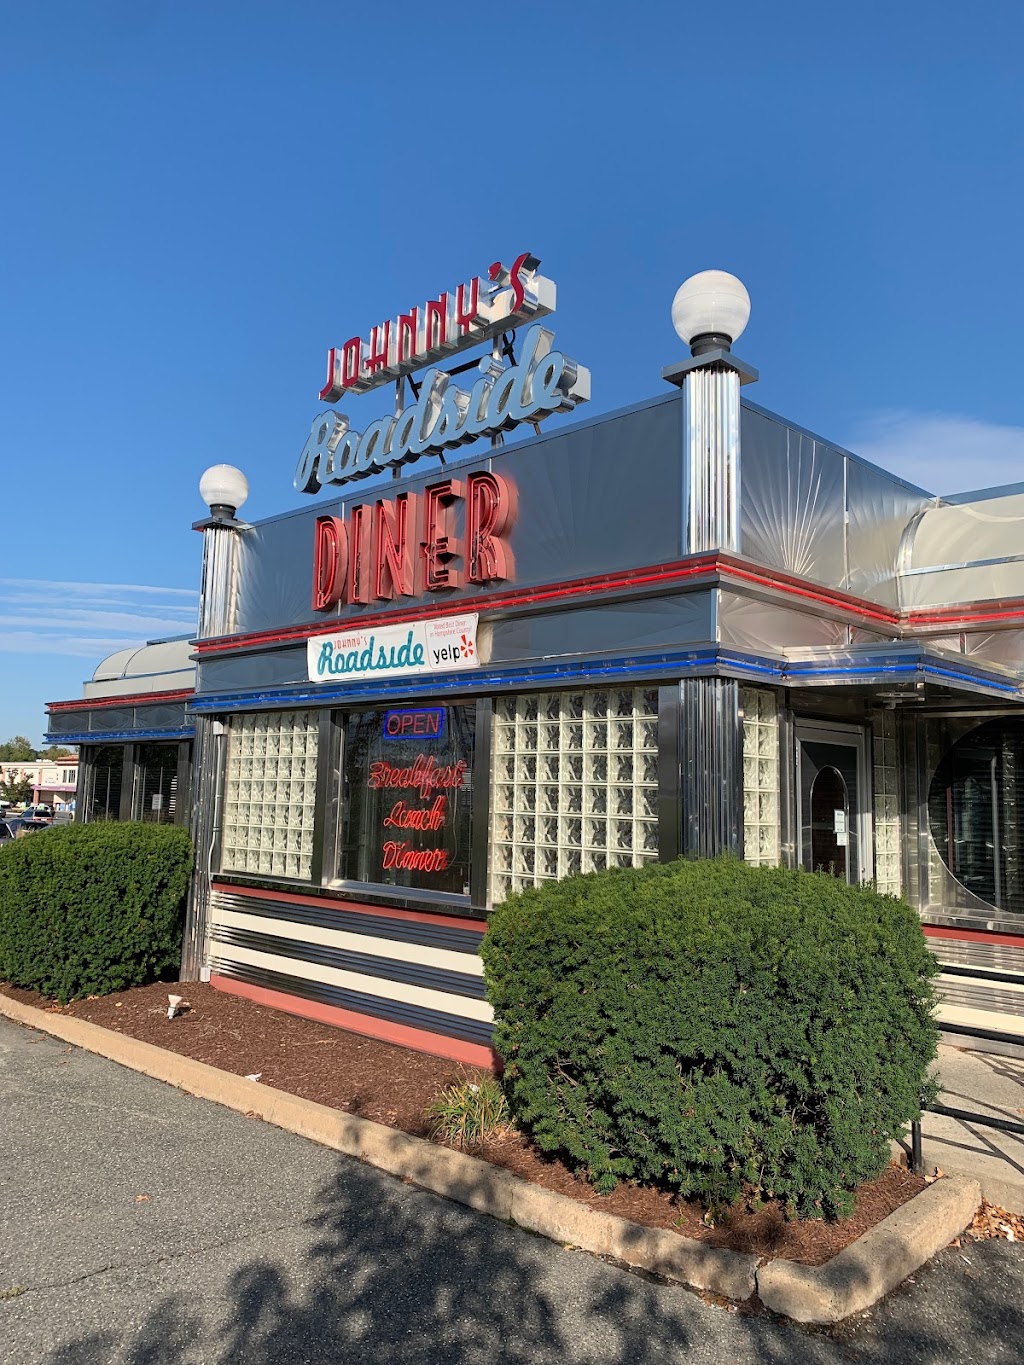 Johnnys Roadside Diner | 458 Russell St, Hadley, MA 01035 | Phone: (413) 256-8000